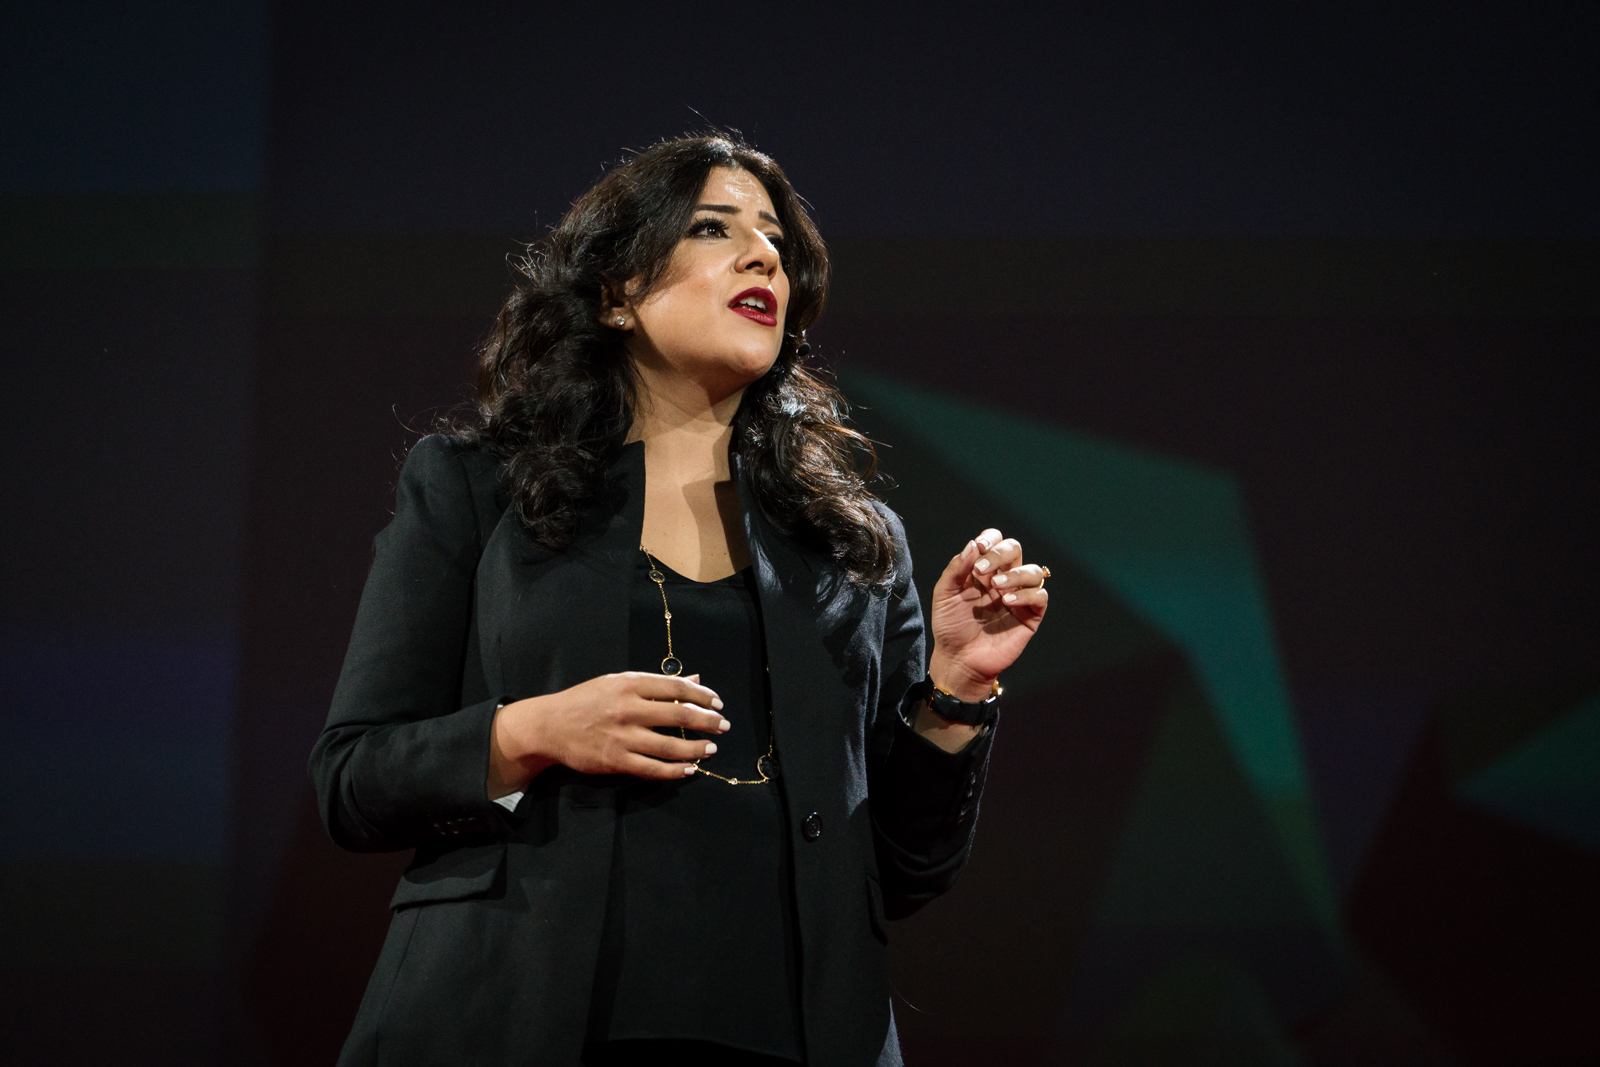 You don’t need to be perfect to write good code: Reshma Saujani at
TED2016